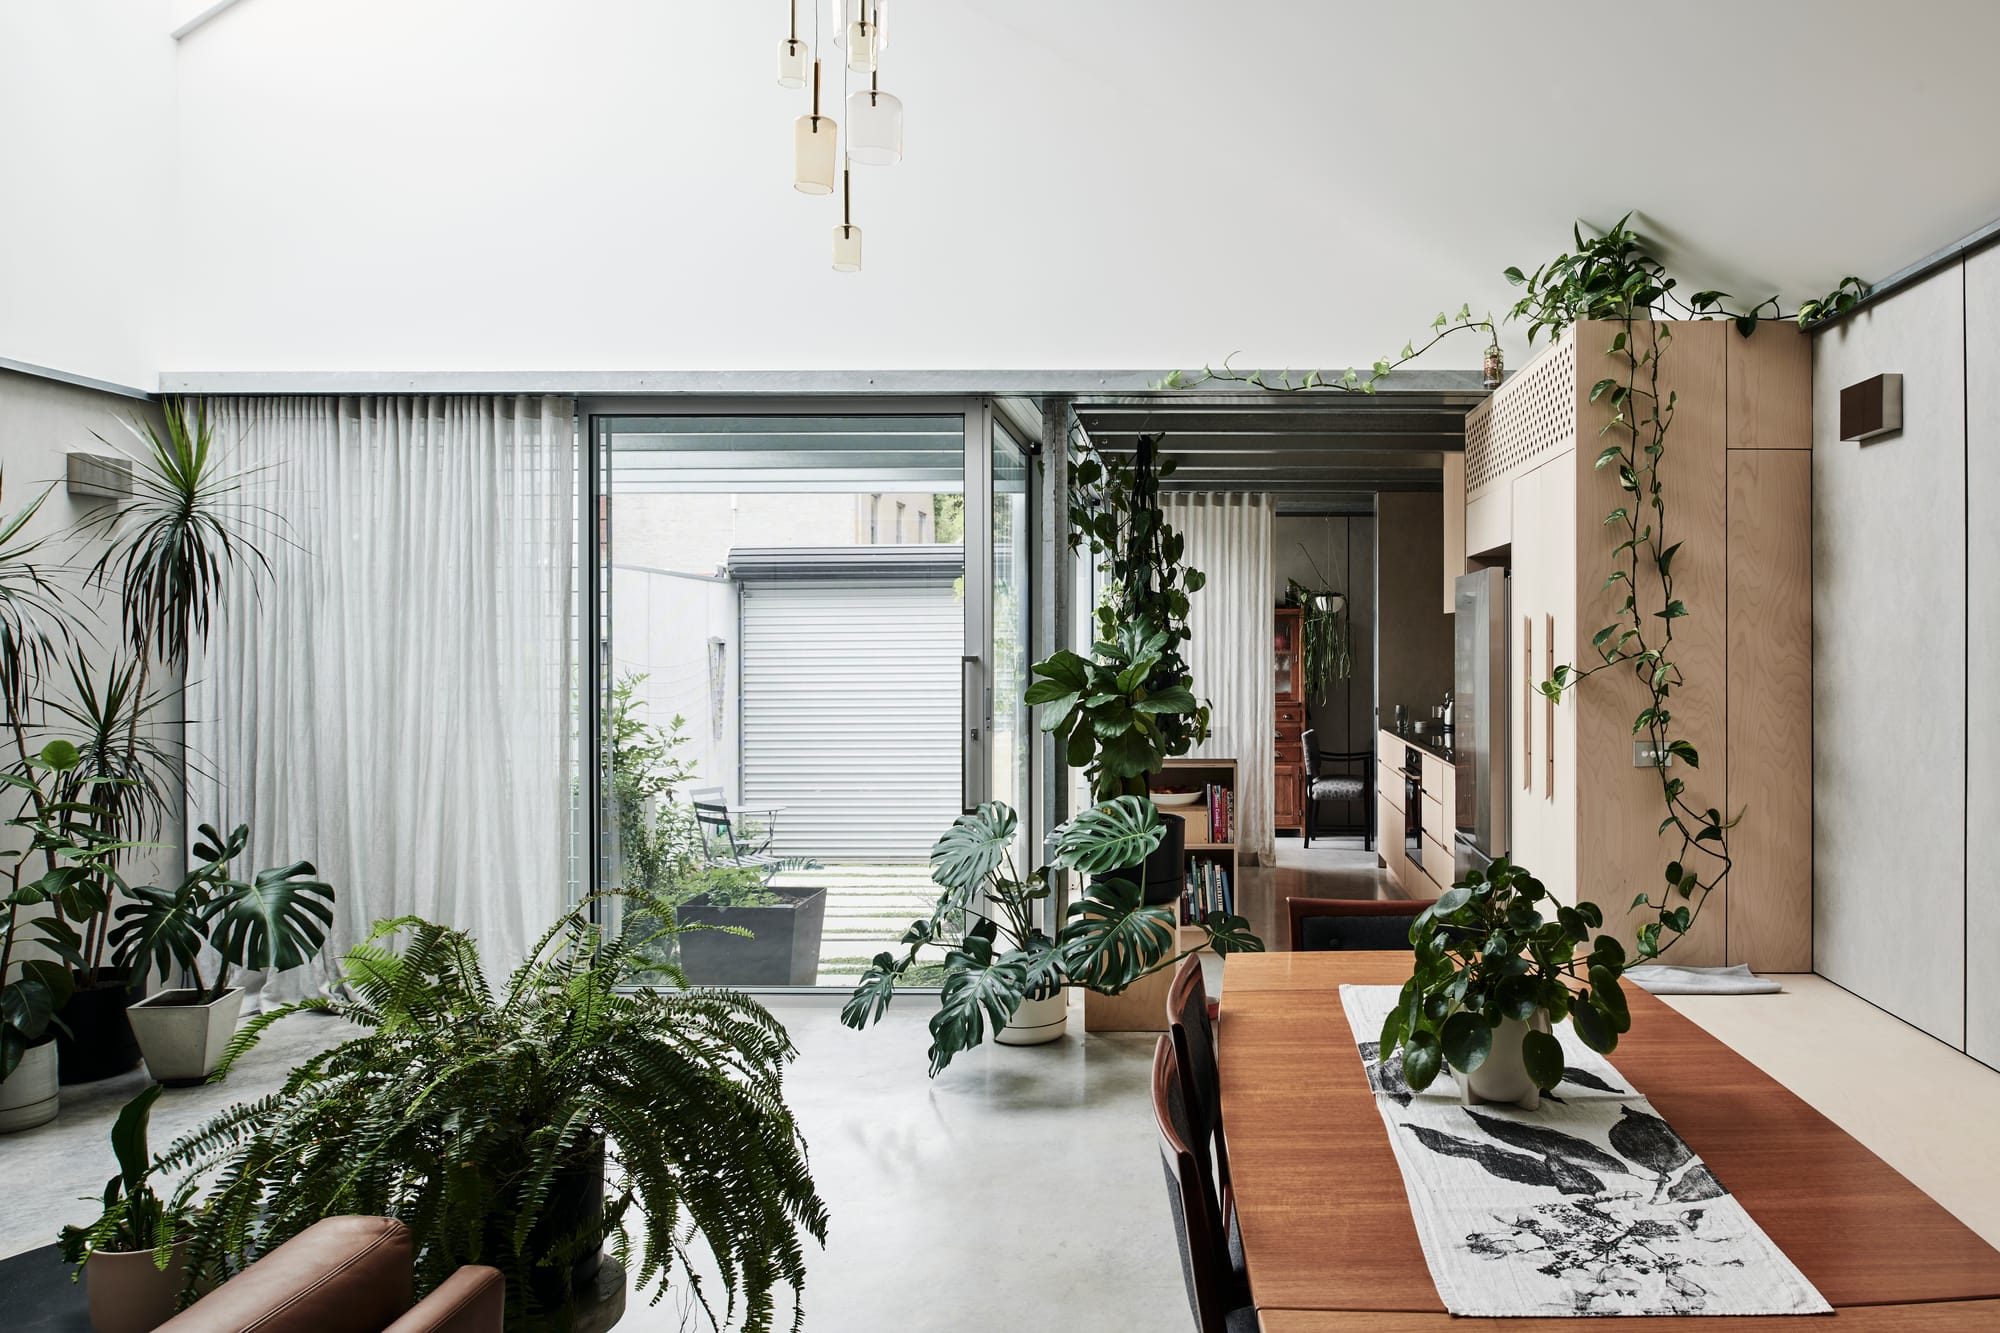 That Old Chestnut by FIGR. Architecture & Design. Photography by Tom Blachford. Residential living space and galley kitchen in industrial style. Concrete floors, walls and white, pitched ceiling. Doors in background open onto industrial courtyard. Lots of plants in space. 